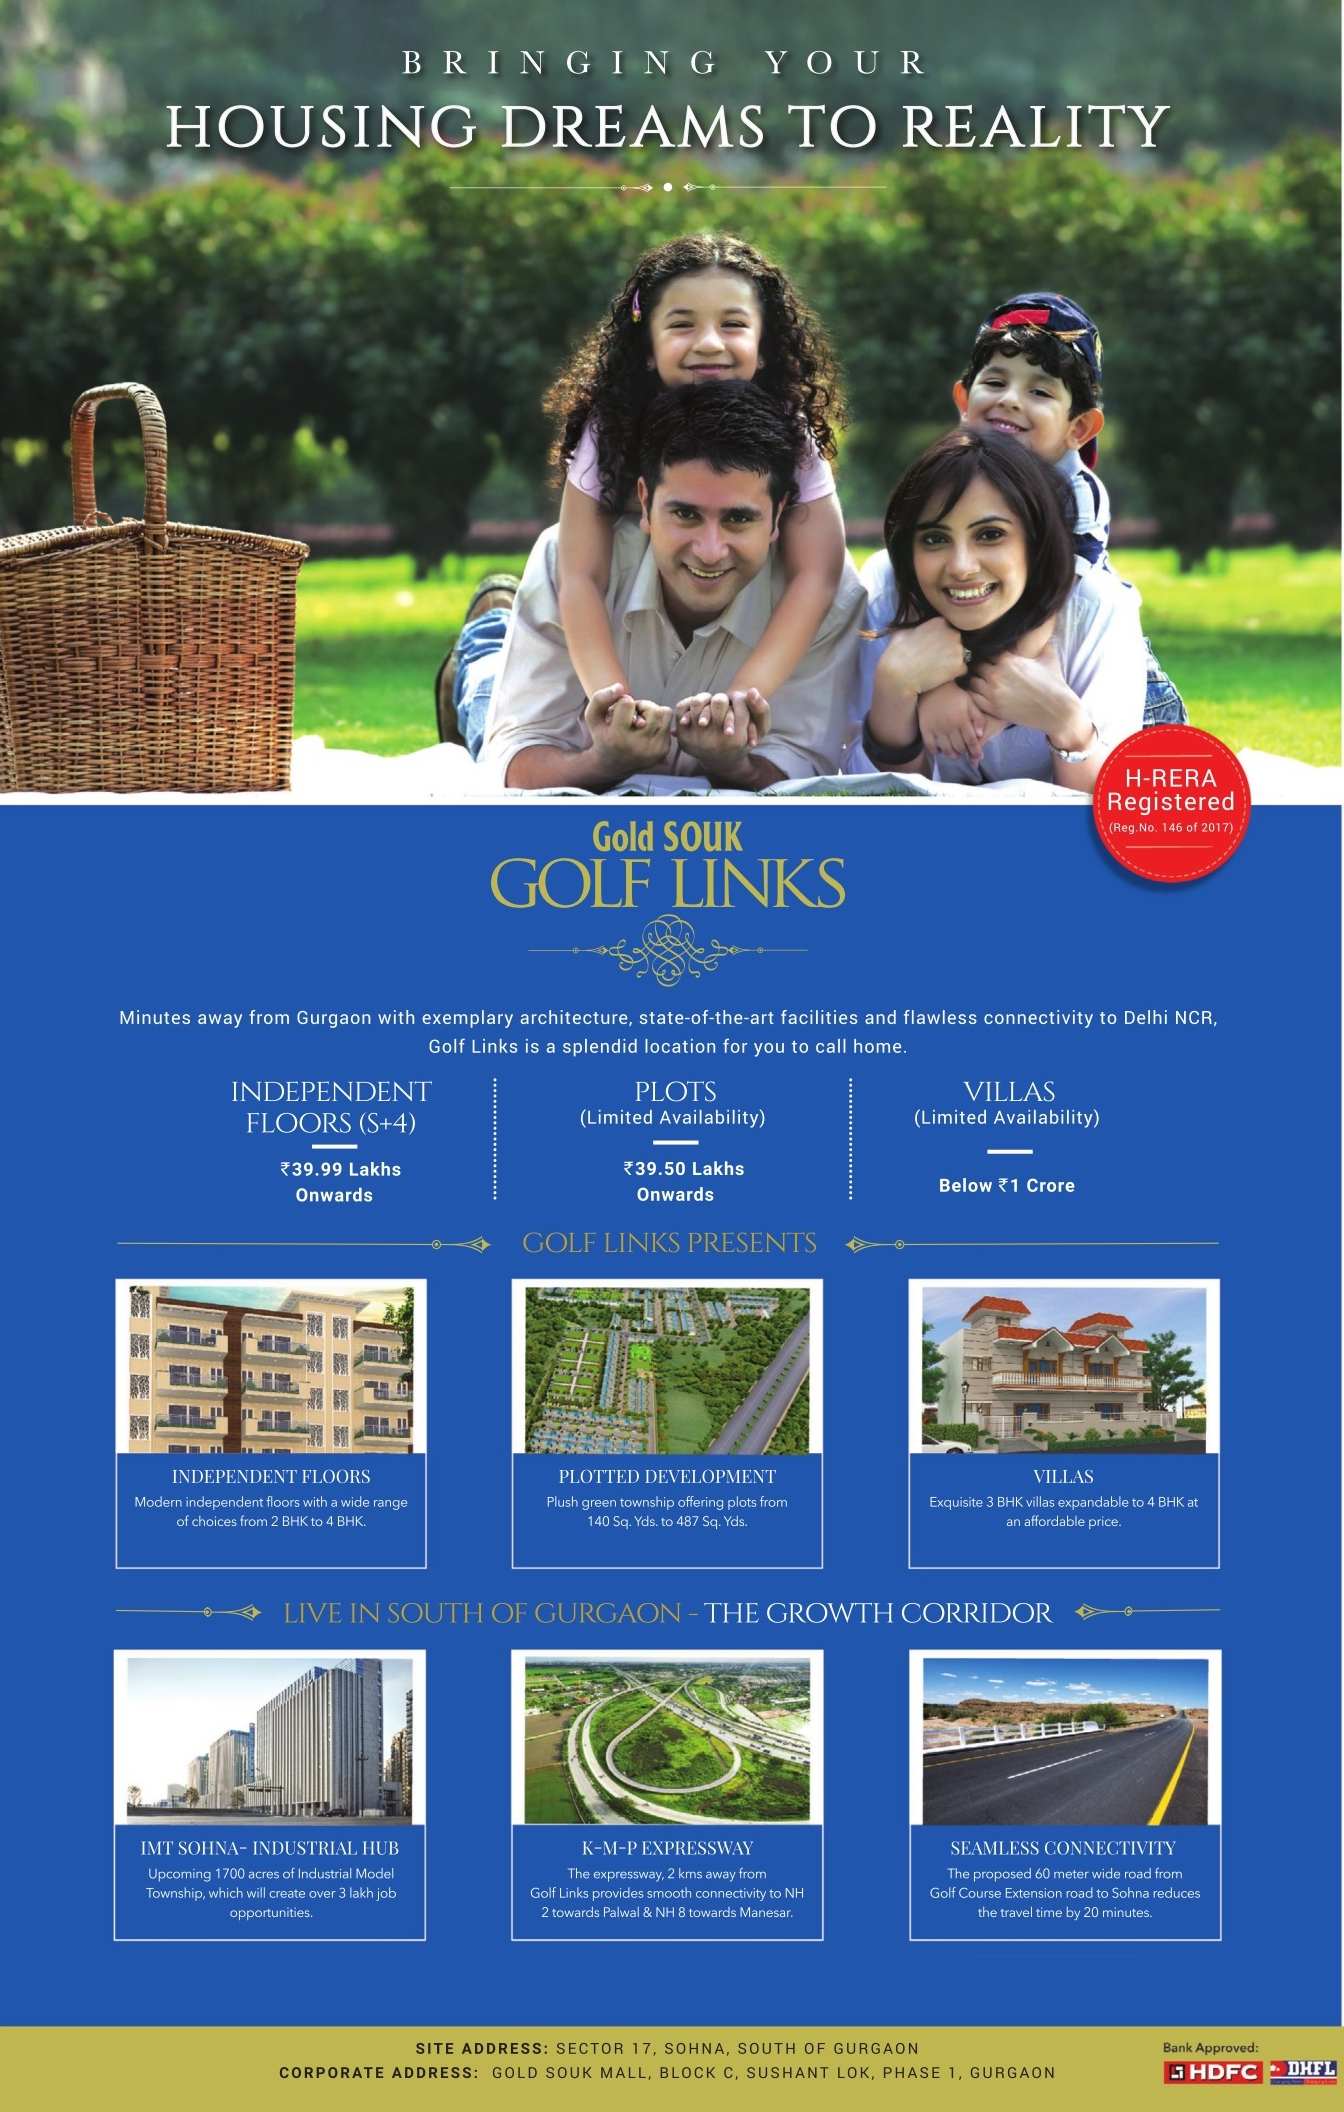 Bring your Housing Dreams to Reality at Gold Souk Golf Links in Sohna Update